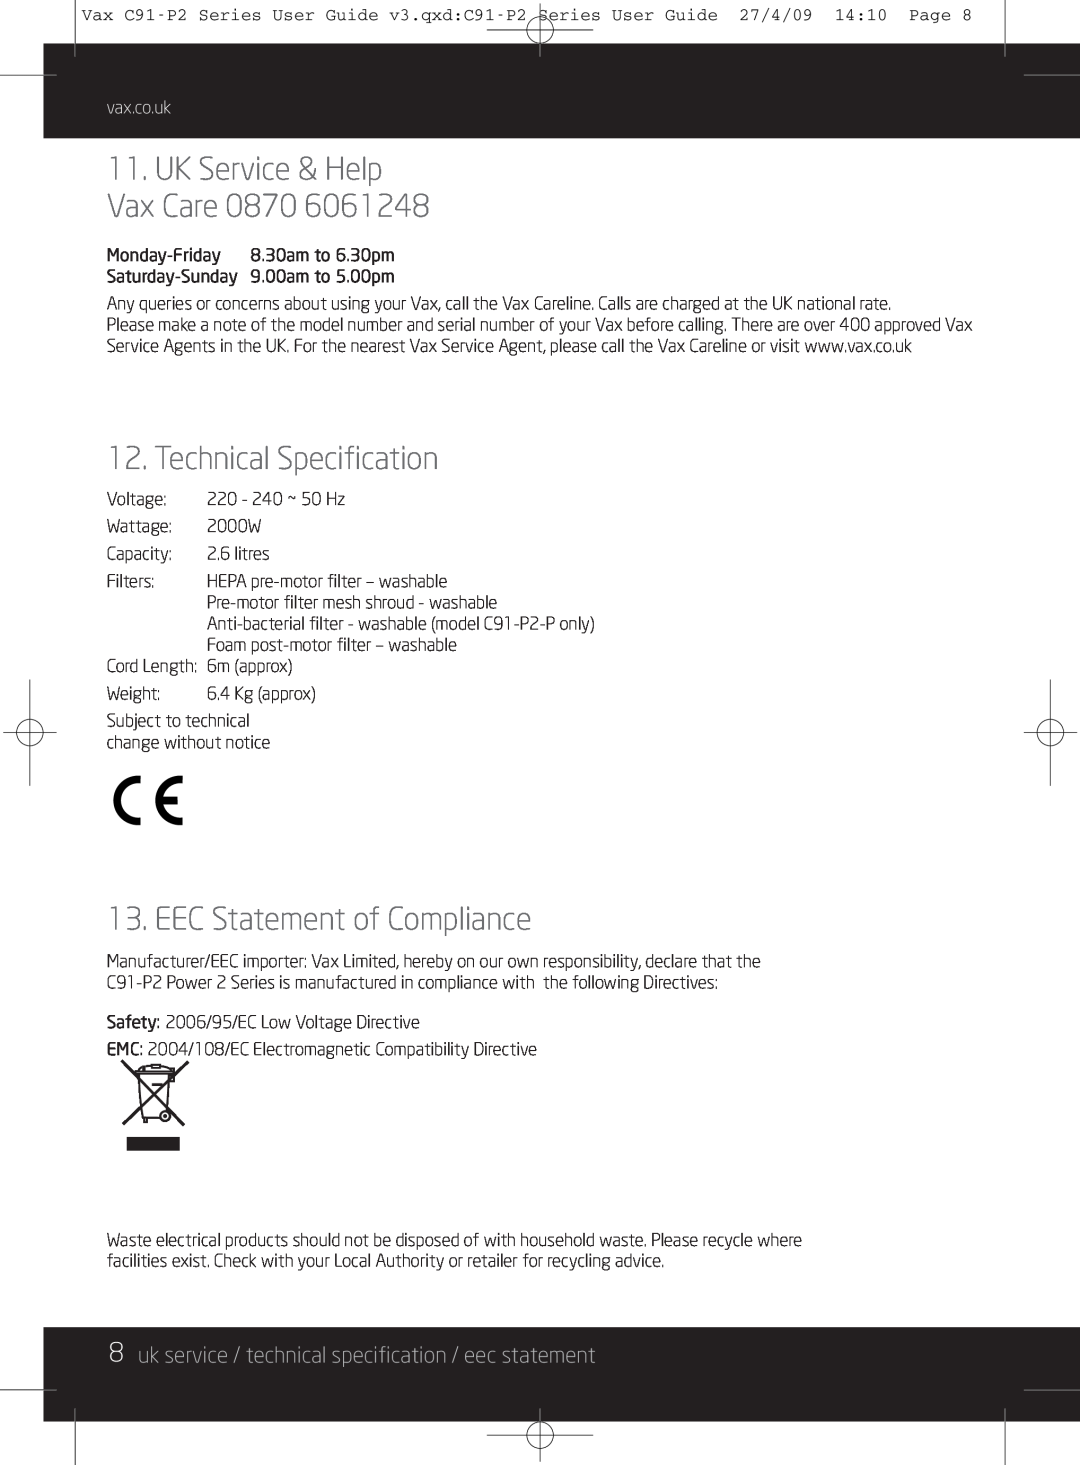 Vax C91-P2 instruction manual UK Service & Help Vax Care, Technical Specification, EEC Statement of Compliance, vax.co.uk 